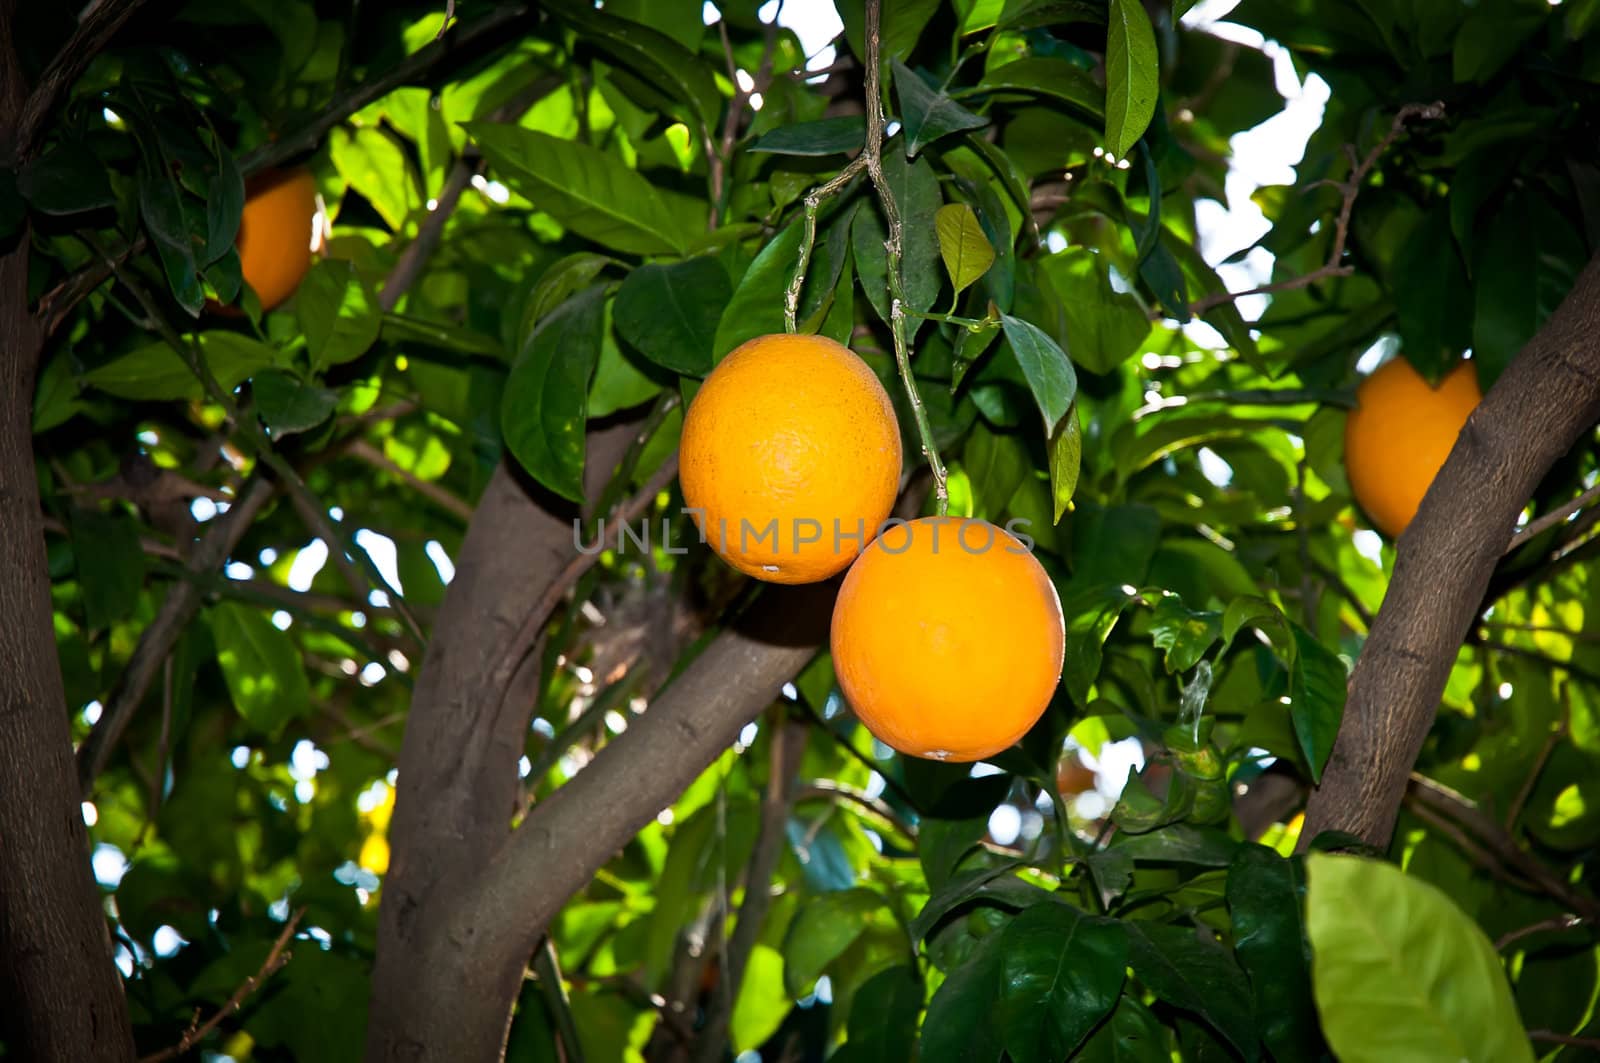 Green leaves and Mature oranges on the tree.